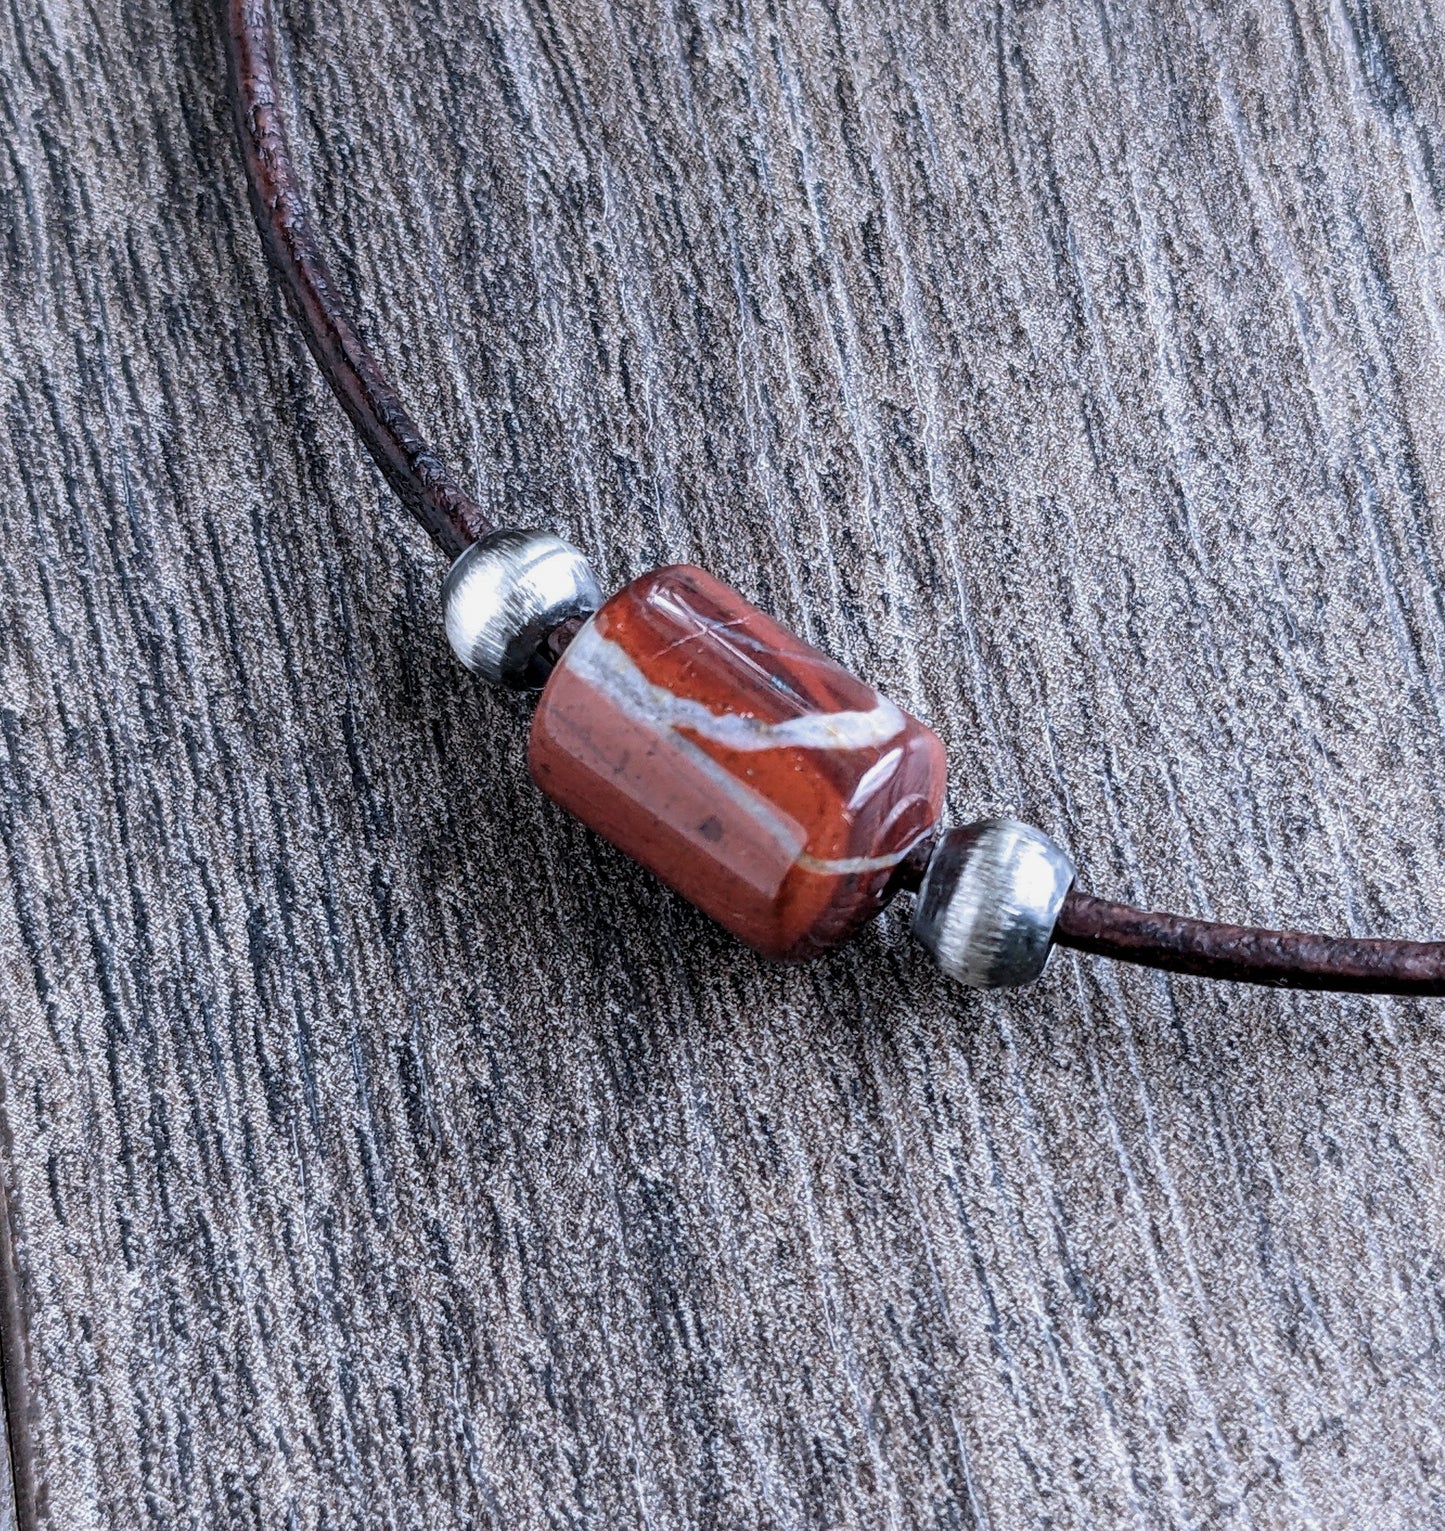 Men's Carnelian Barrel Bead Leather Cord Necklace 18 Inches